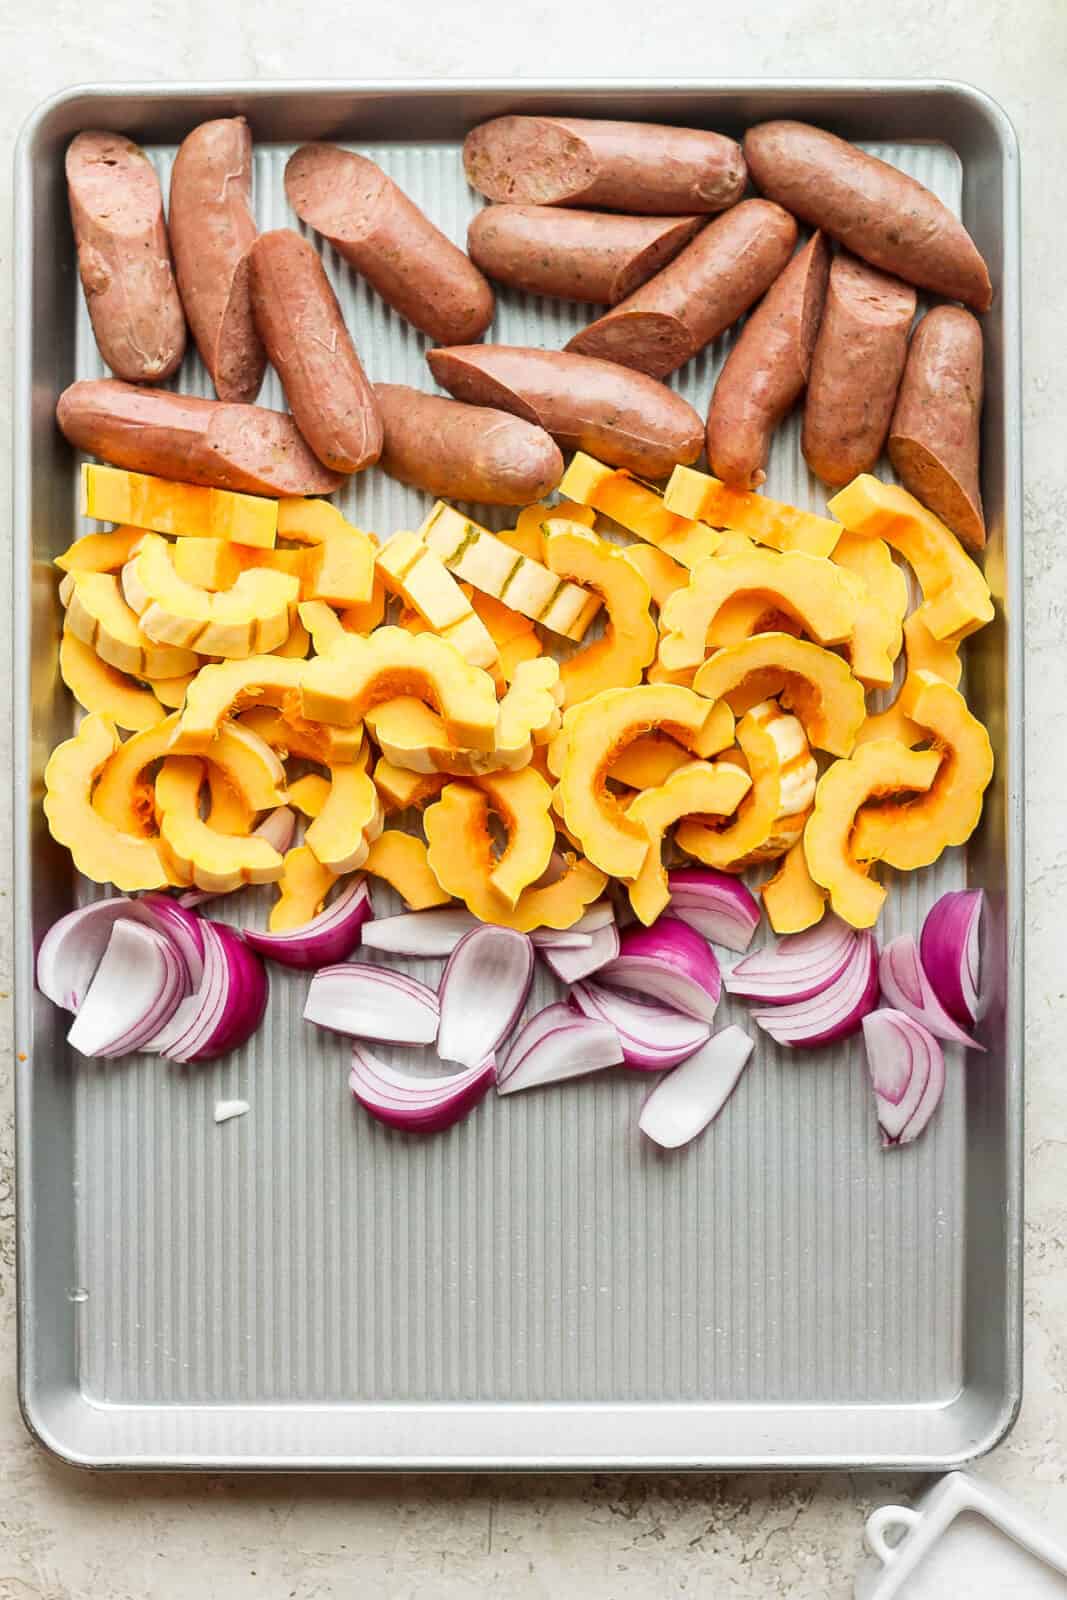 Sausage, squash, and red onions on the sheet pan before baking.